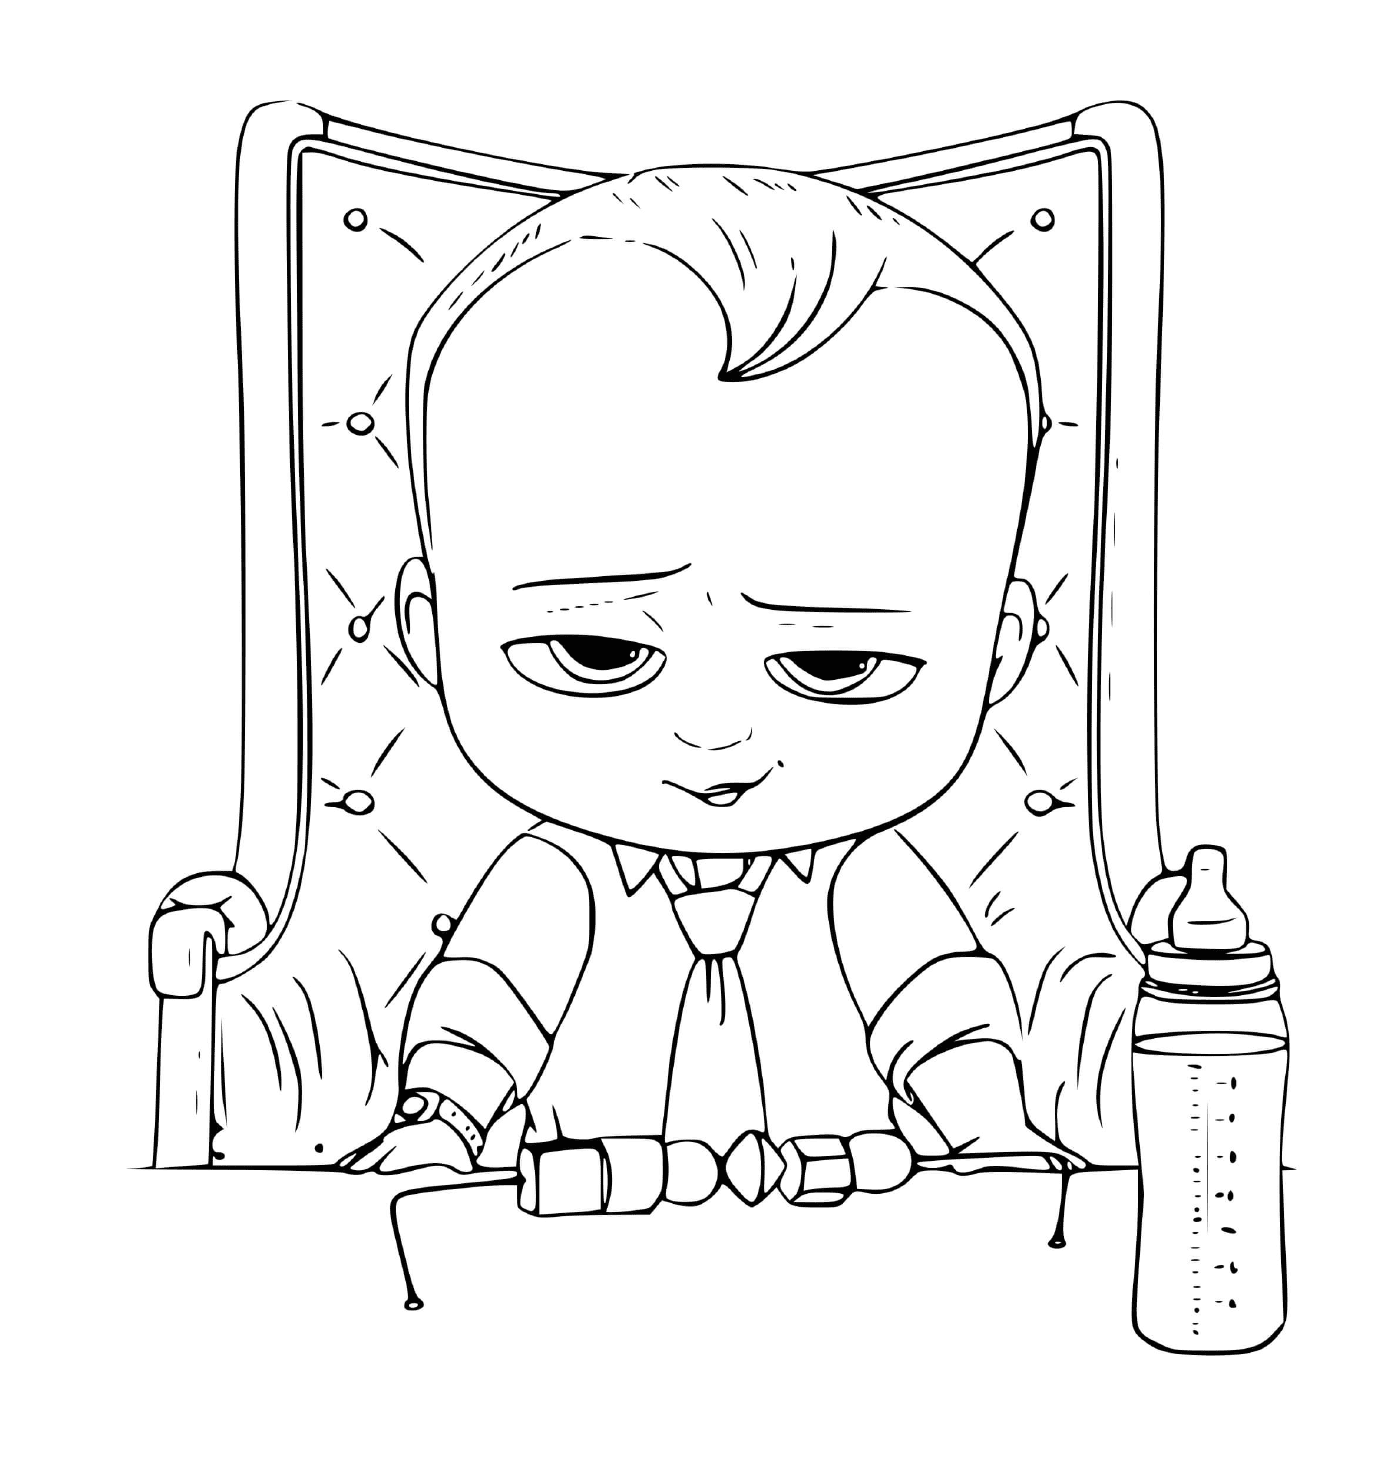  A baby sitting on a royal couch 